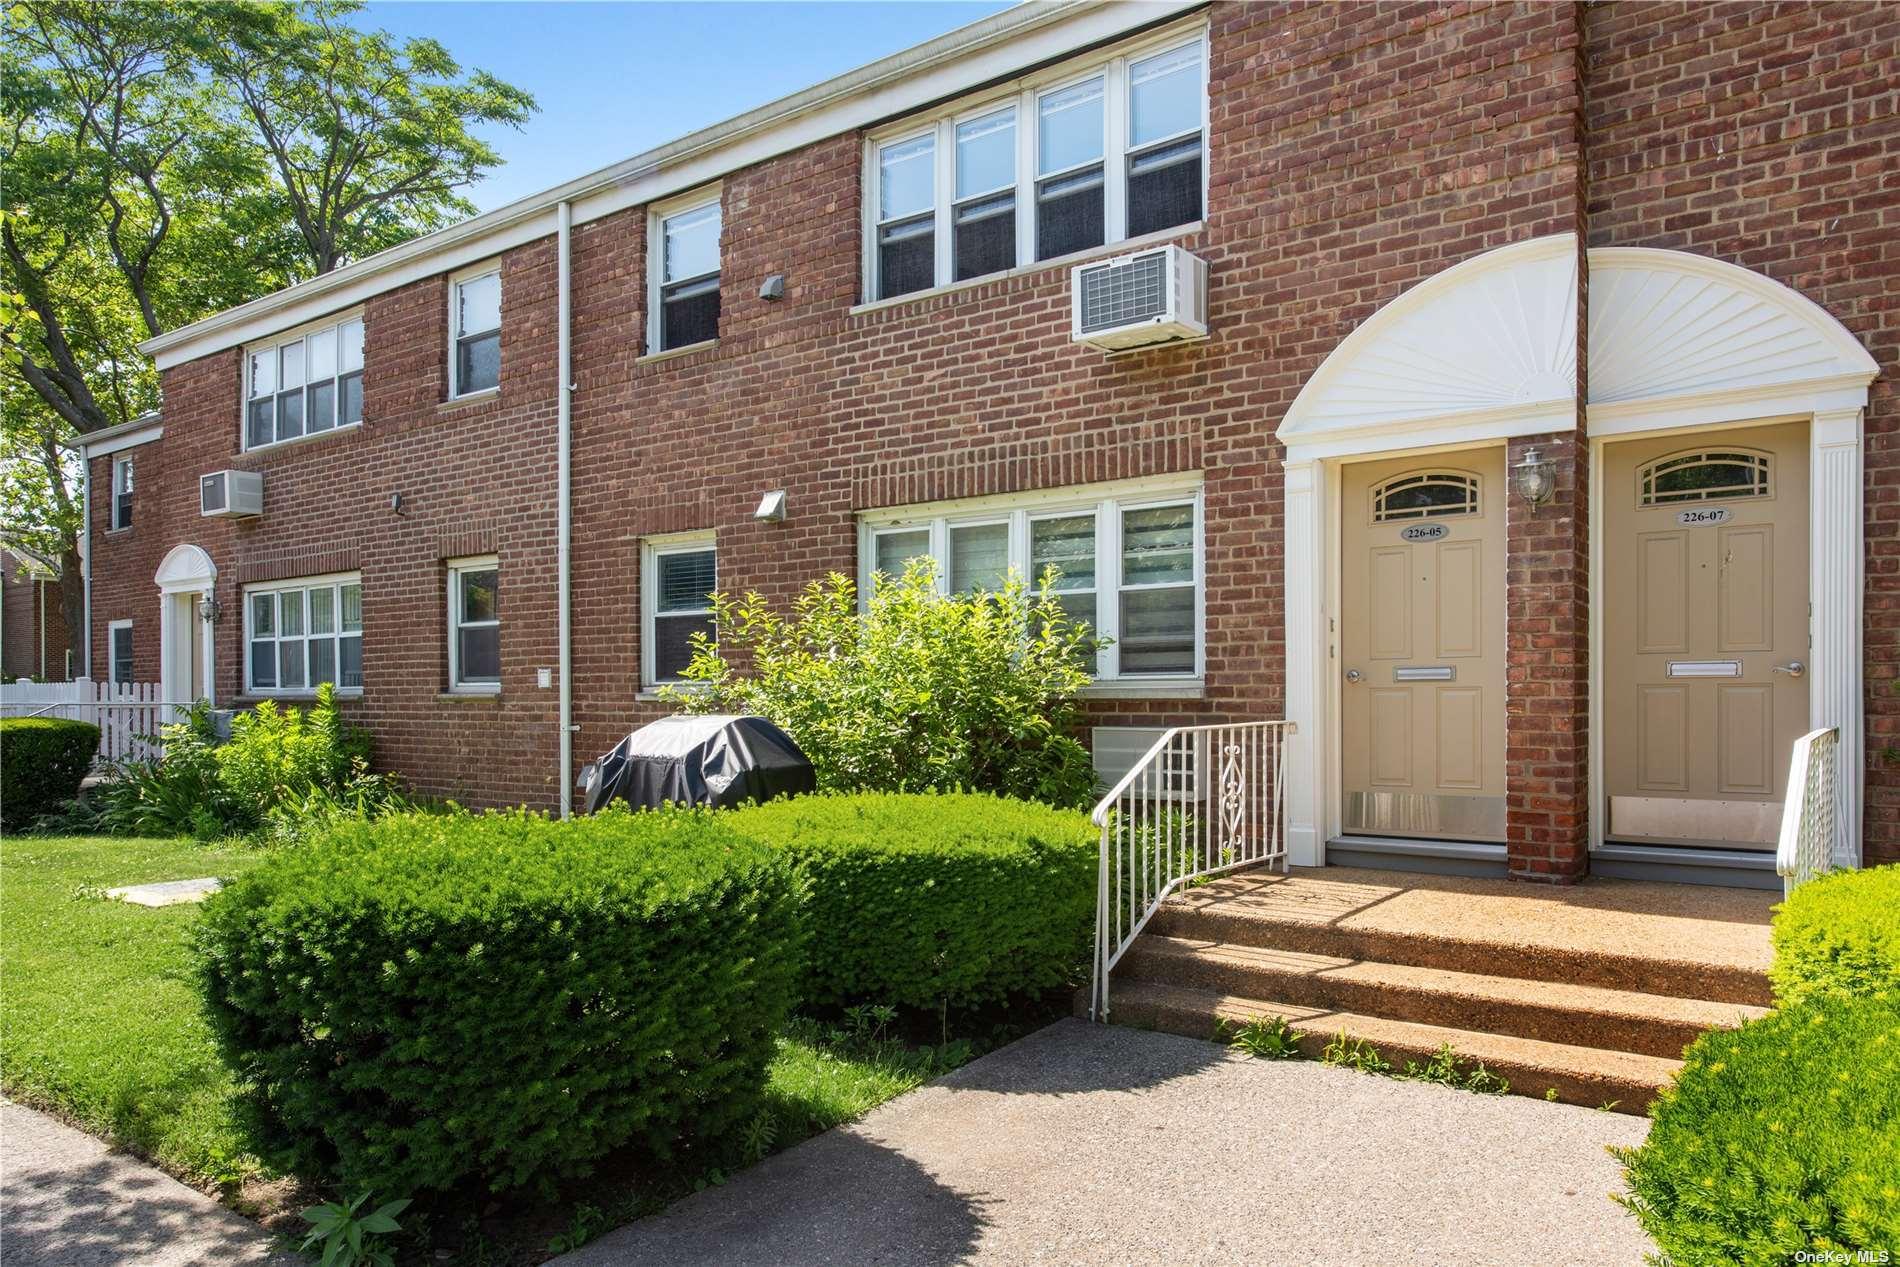 22605 Union Turnpike #B in Queens, Oakland Gardens, NY 11364